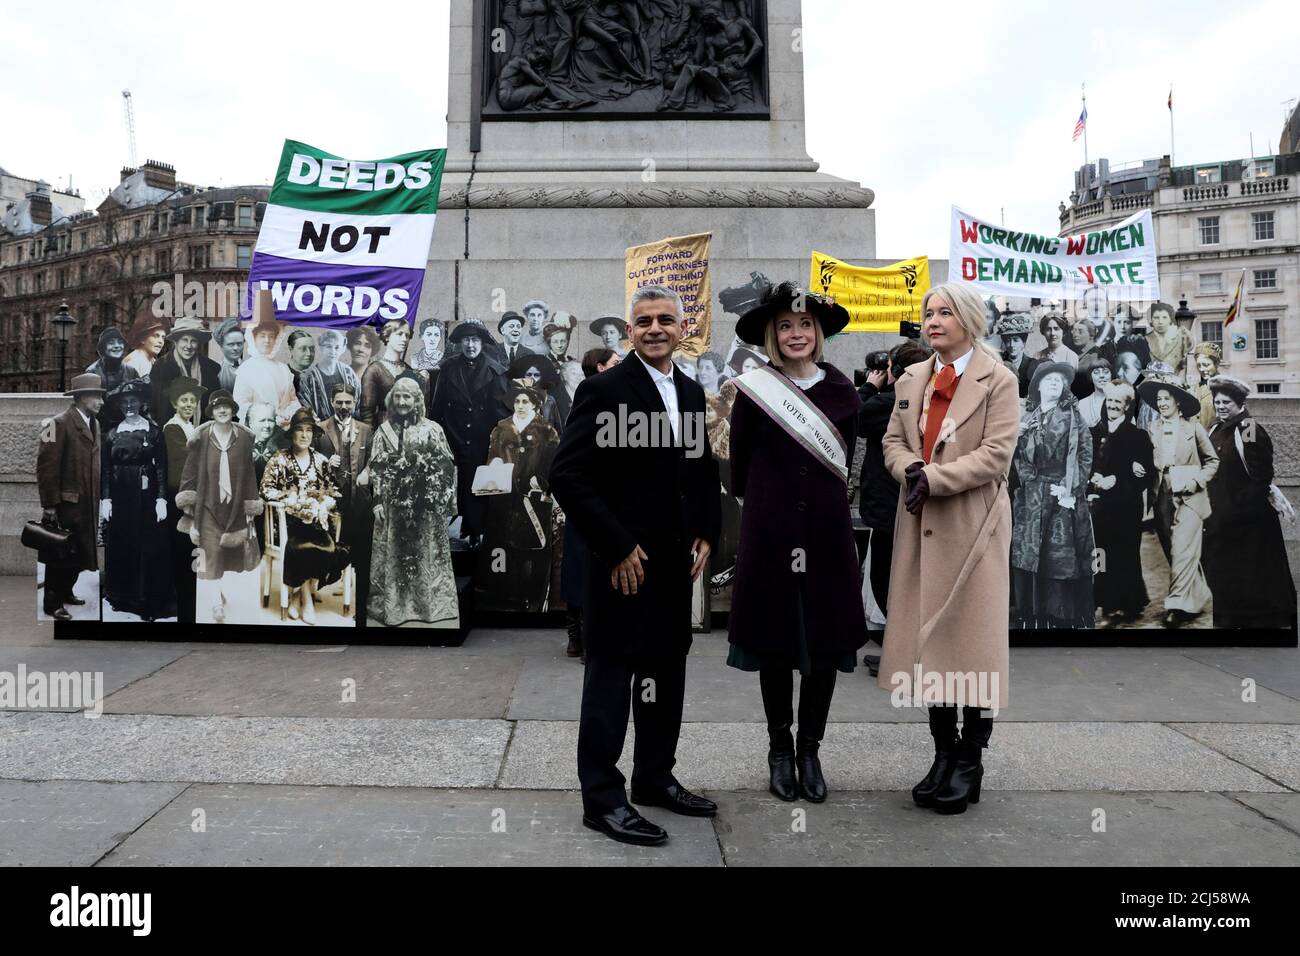 The Mayor of London, Sadiq Khan, historian Lucy Worsley, and Justine Simons deputy mayor for culture and creativity, pose for a photograph to mark the centenary of women's suffrage in London, Britain February 6, 2018. REUTERS/Simon Dawson Stock Photo